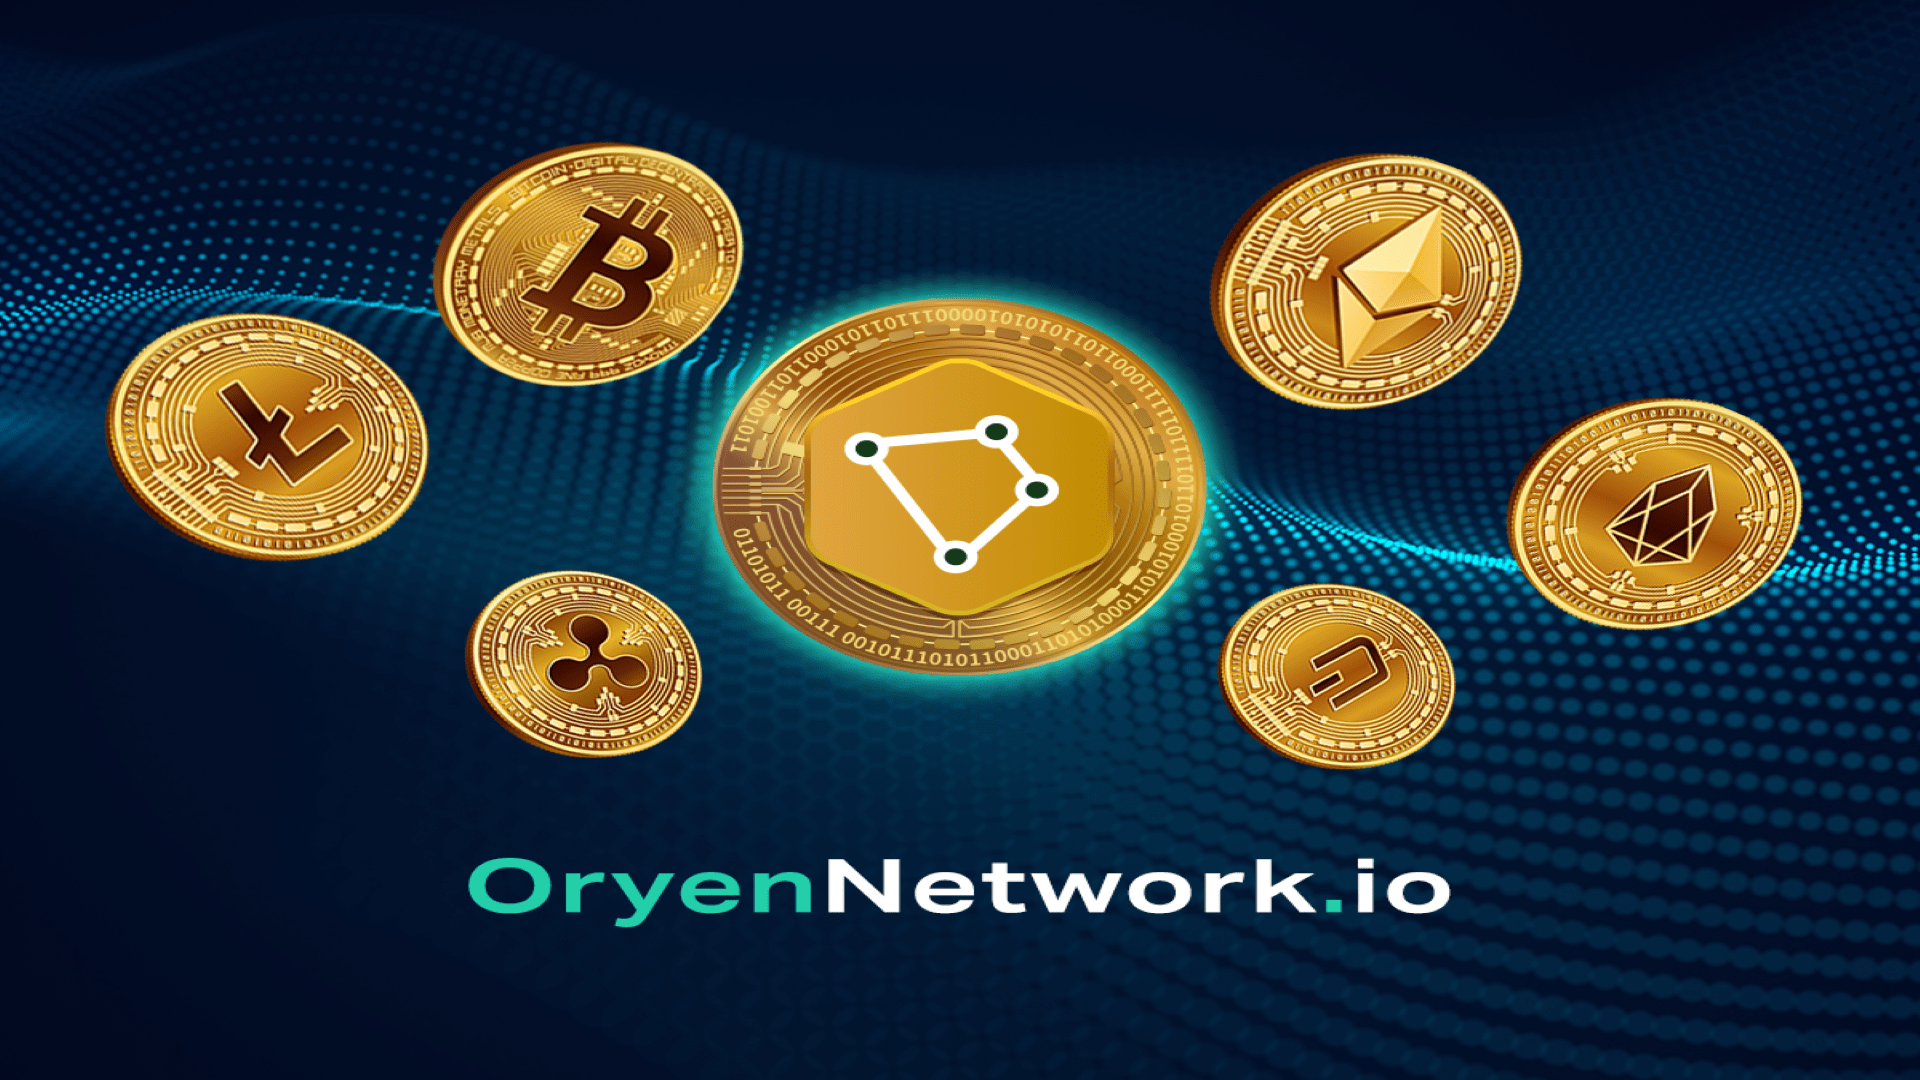 Oryen Network Presale Elevated To Top DeFi Project This Year – Is ORY Overcoming Curve and Helium?